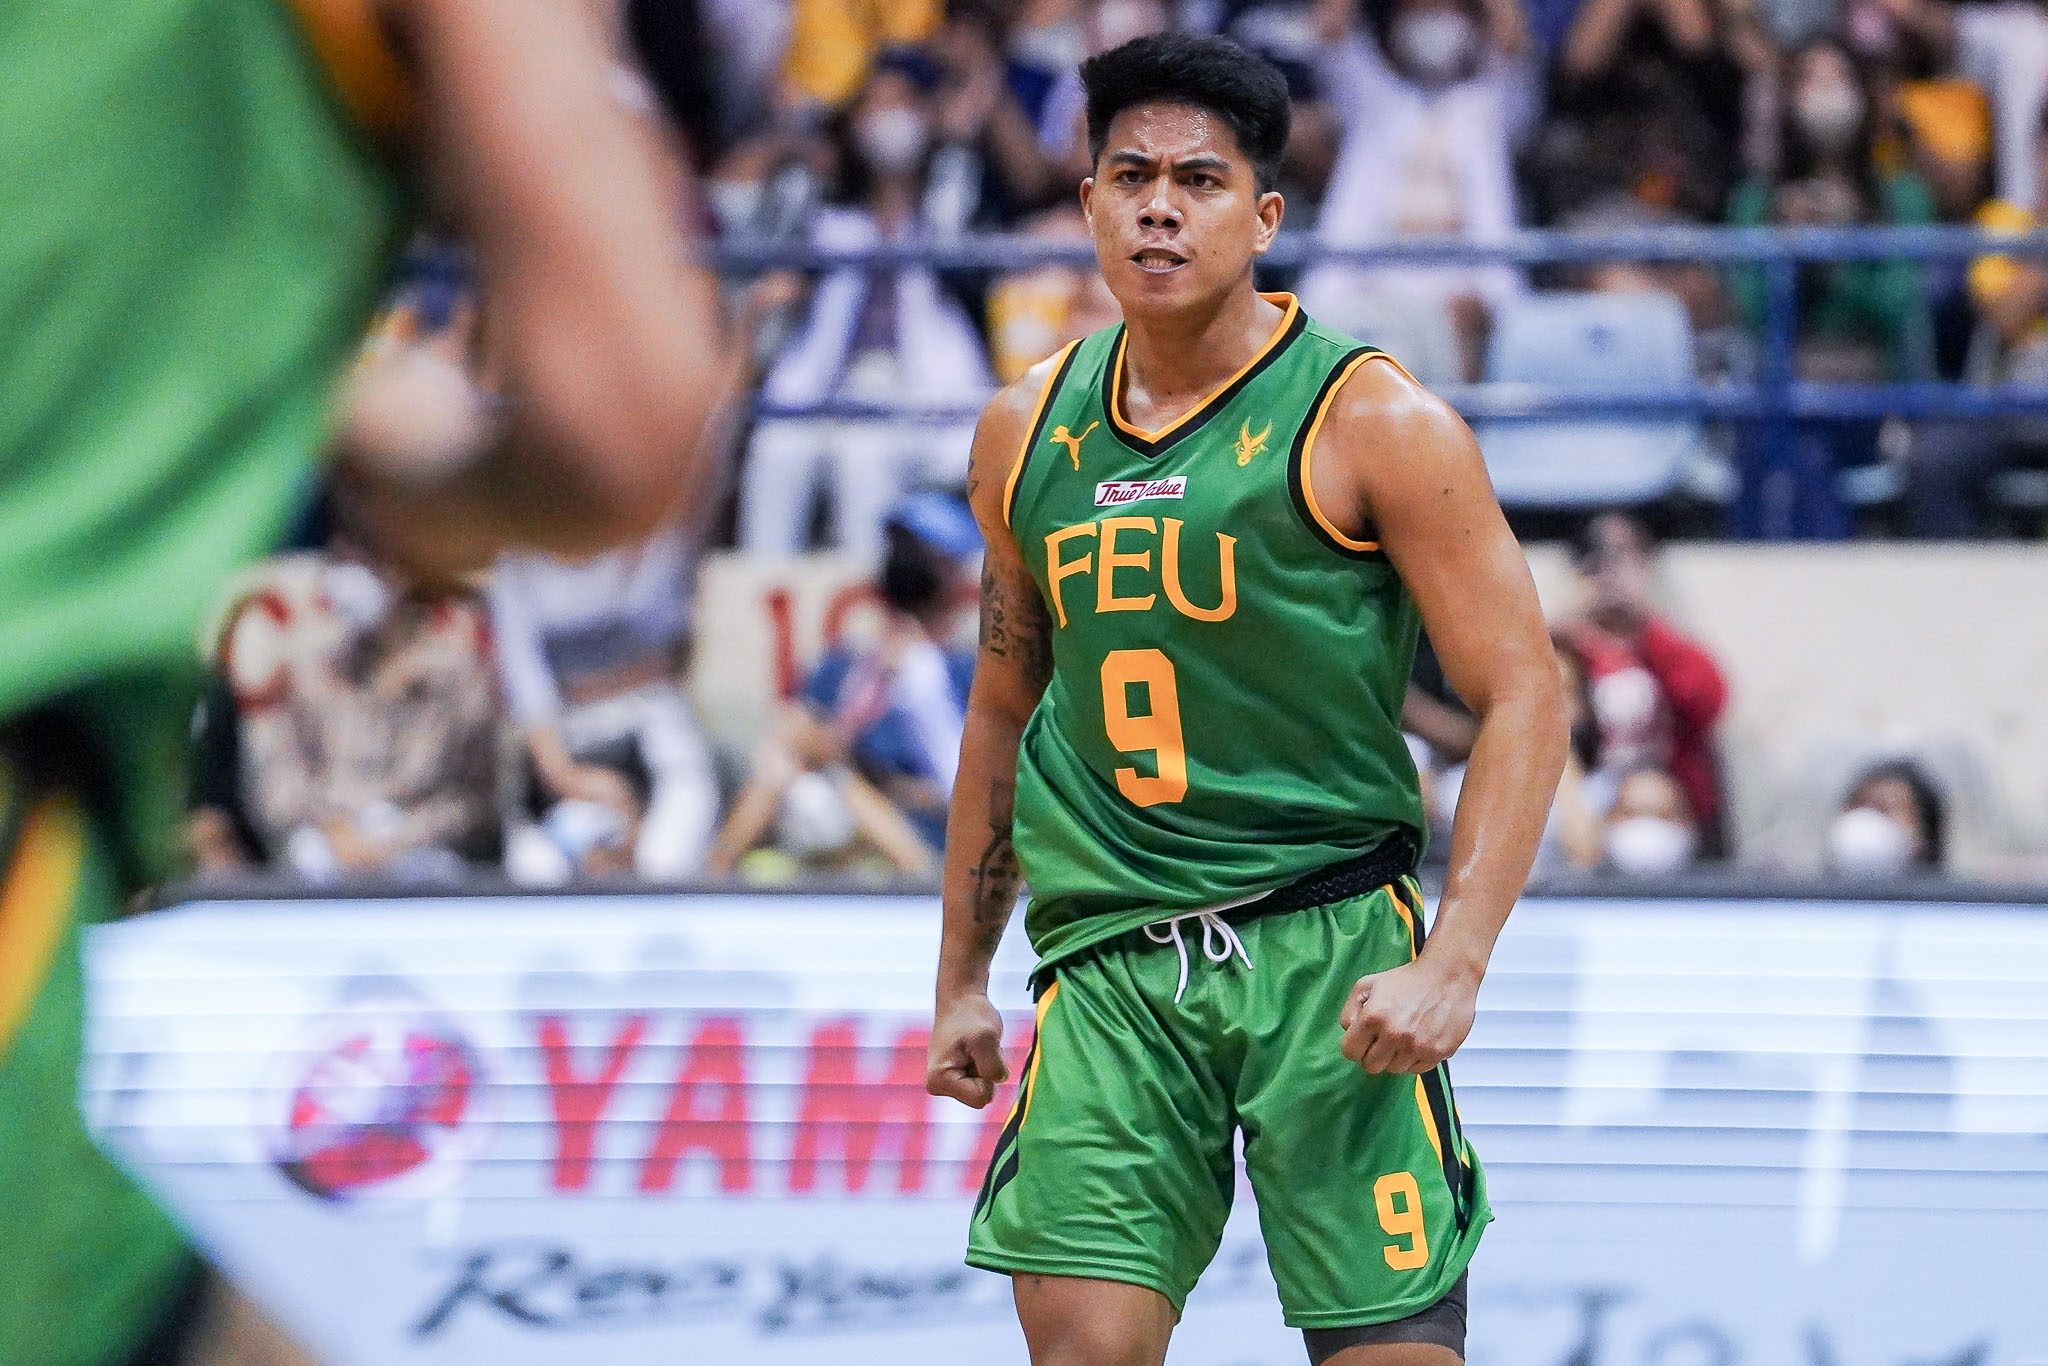 Bryan Sajonia sparks FEU comeback from historic slump, wins Player of the Week